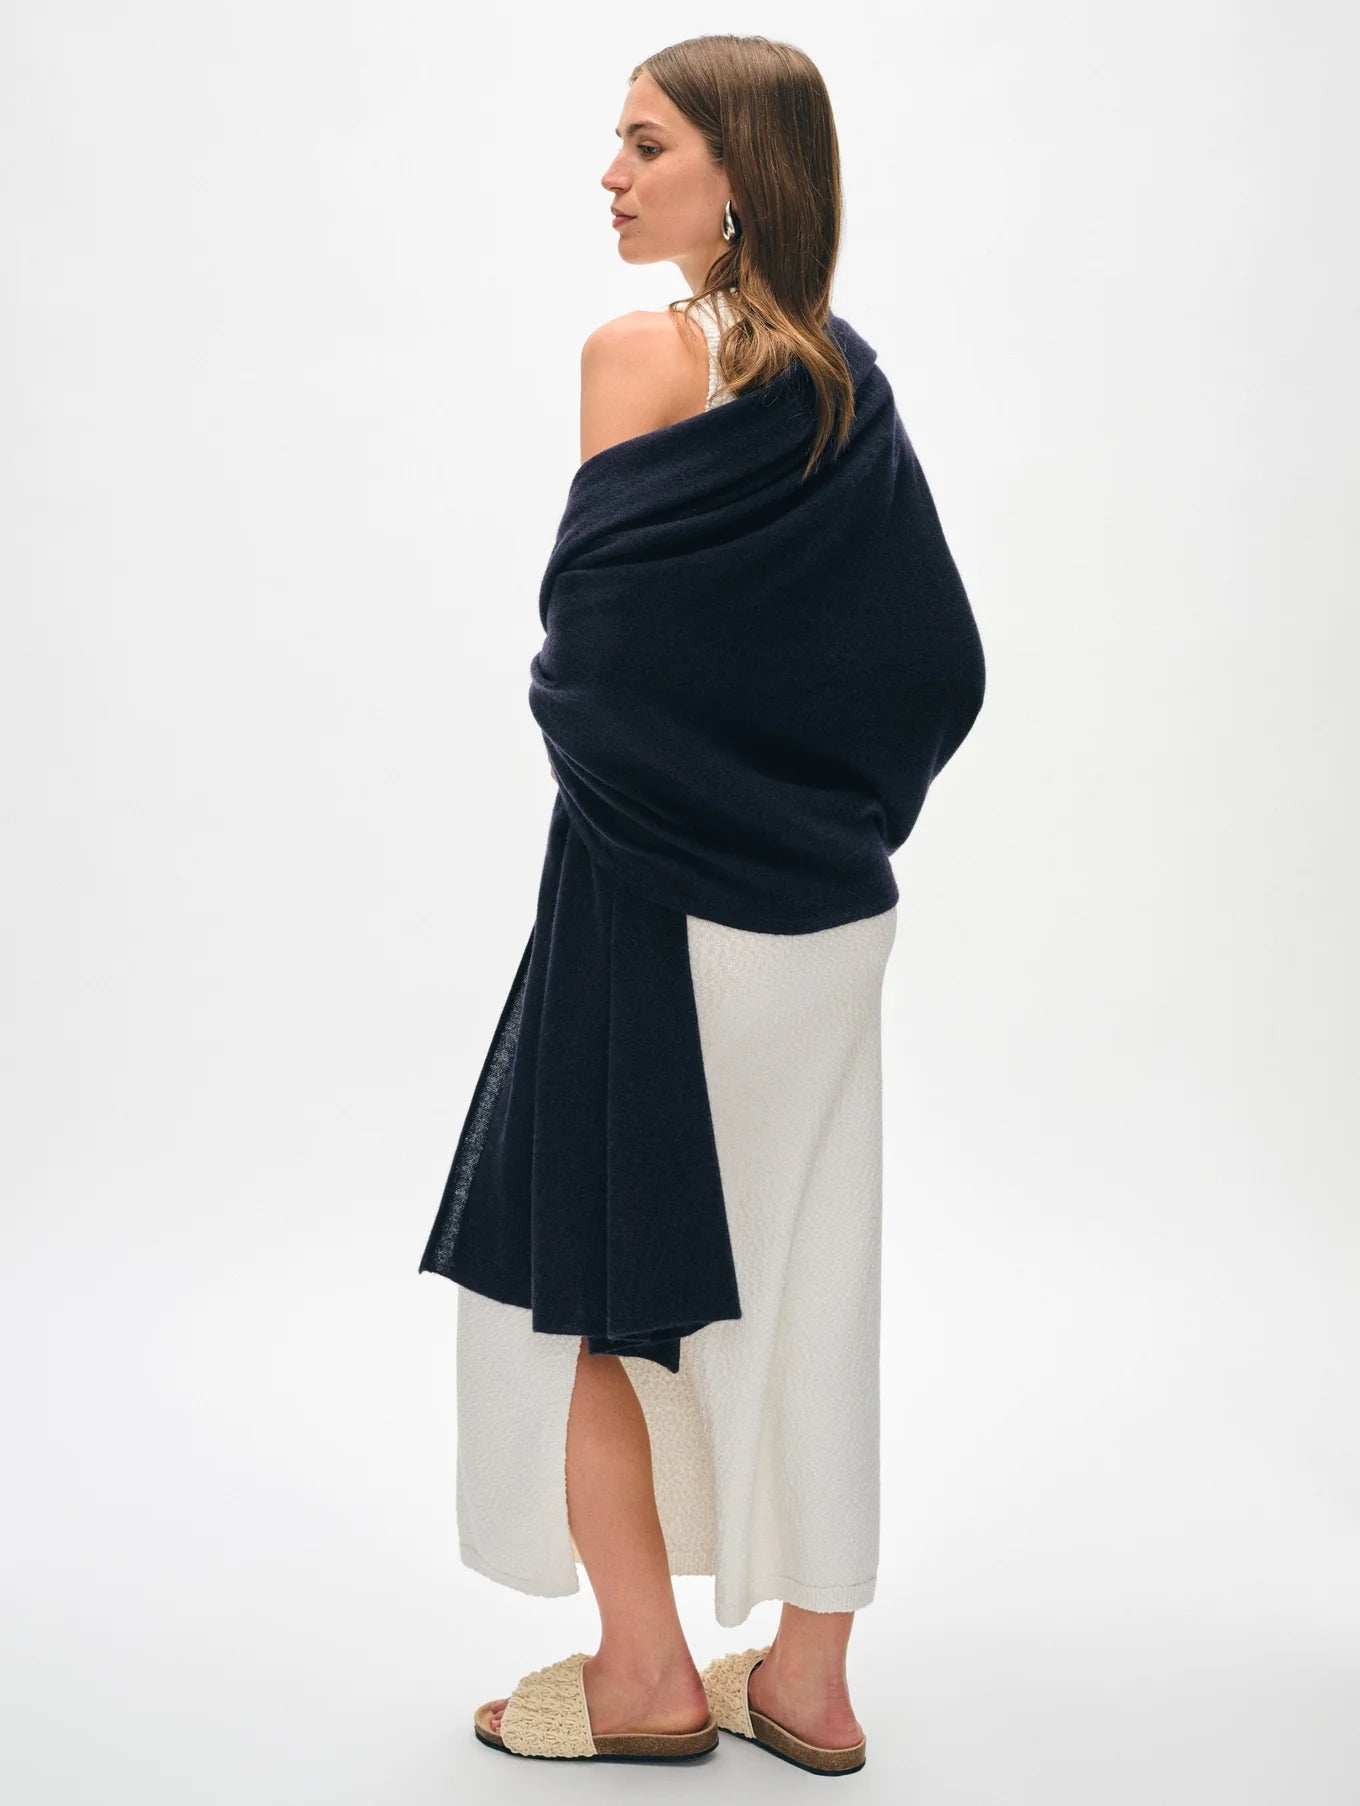 Back view of a woman wearing the Deep Navy Cashmere Travel Wrap by White + Warren